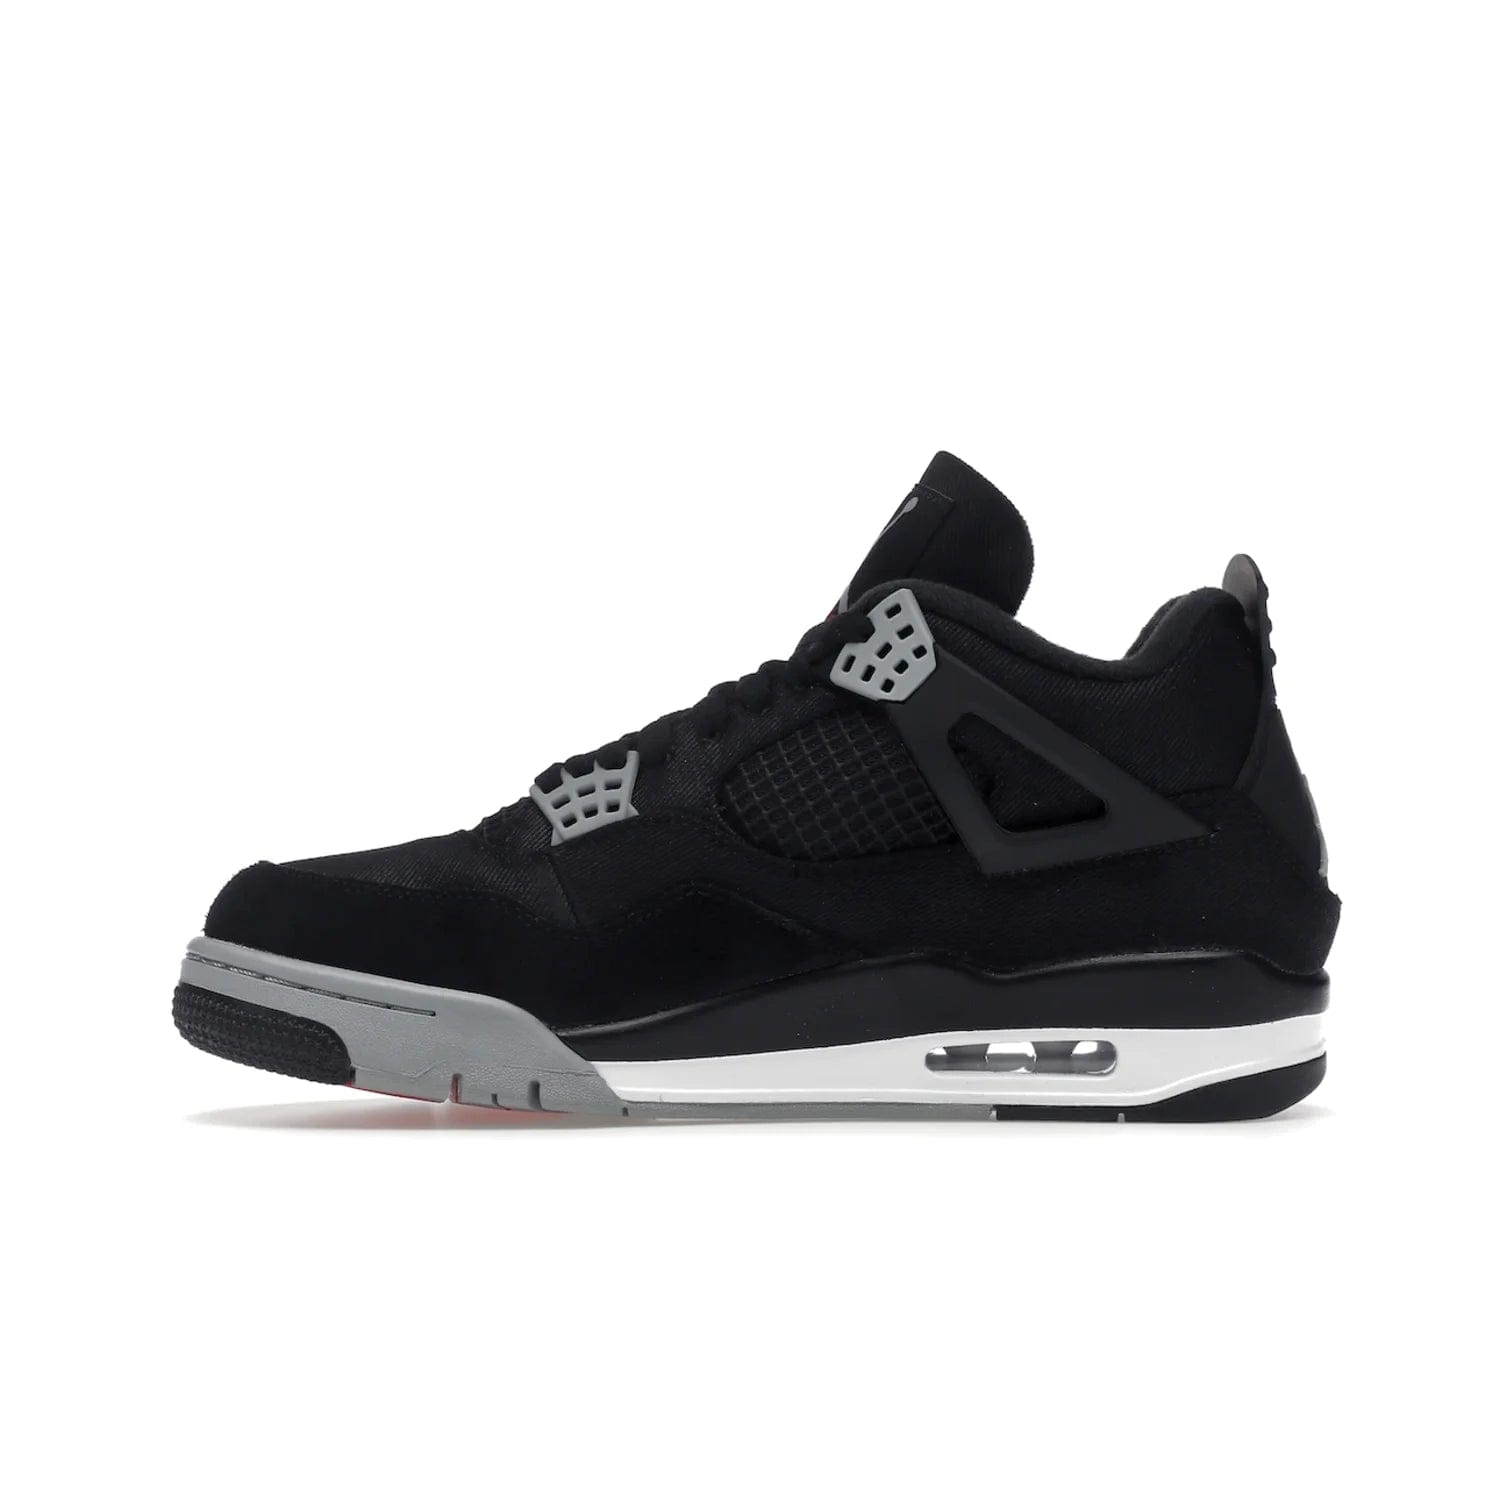 Jordan 4 Retro SE Black Canvas - Image 19 - Only at www.BallersClubKickz.com - The Air Jordan 4 Retro SE Black Canvas brings timeless style and modern luxury. Classic mid-top sneaker in black canvas and grey suede with tonal Jumpman logo, Flight logo and polyurethane midsole with visible Air-sole cushioning. Refresh your sneaker collection and rock the Air Jordan 4 Retro SE Black Canvas.